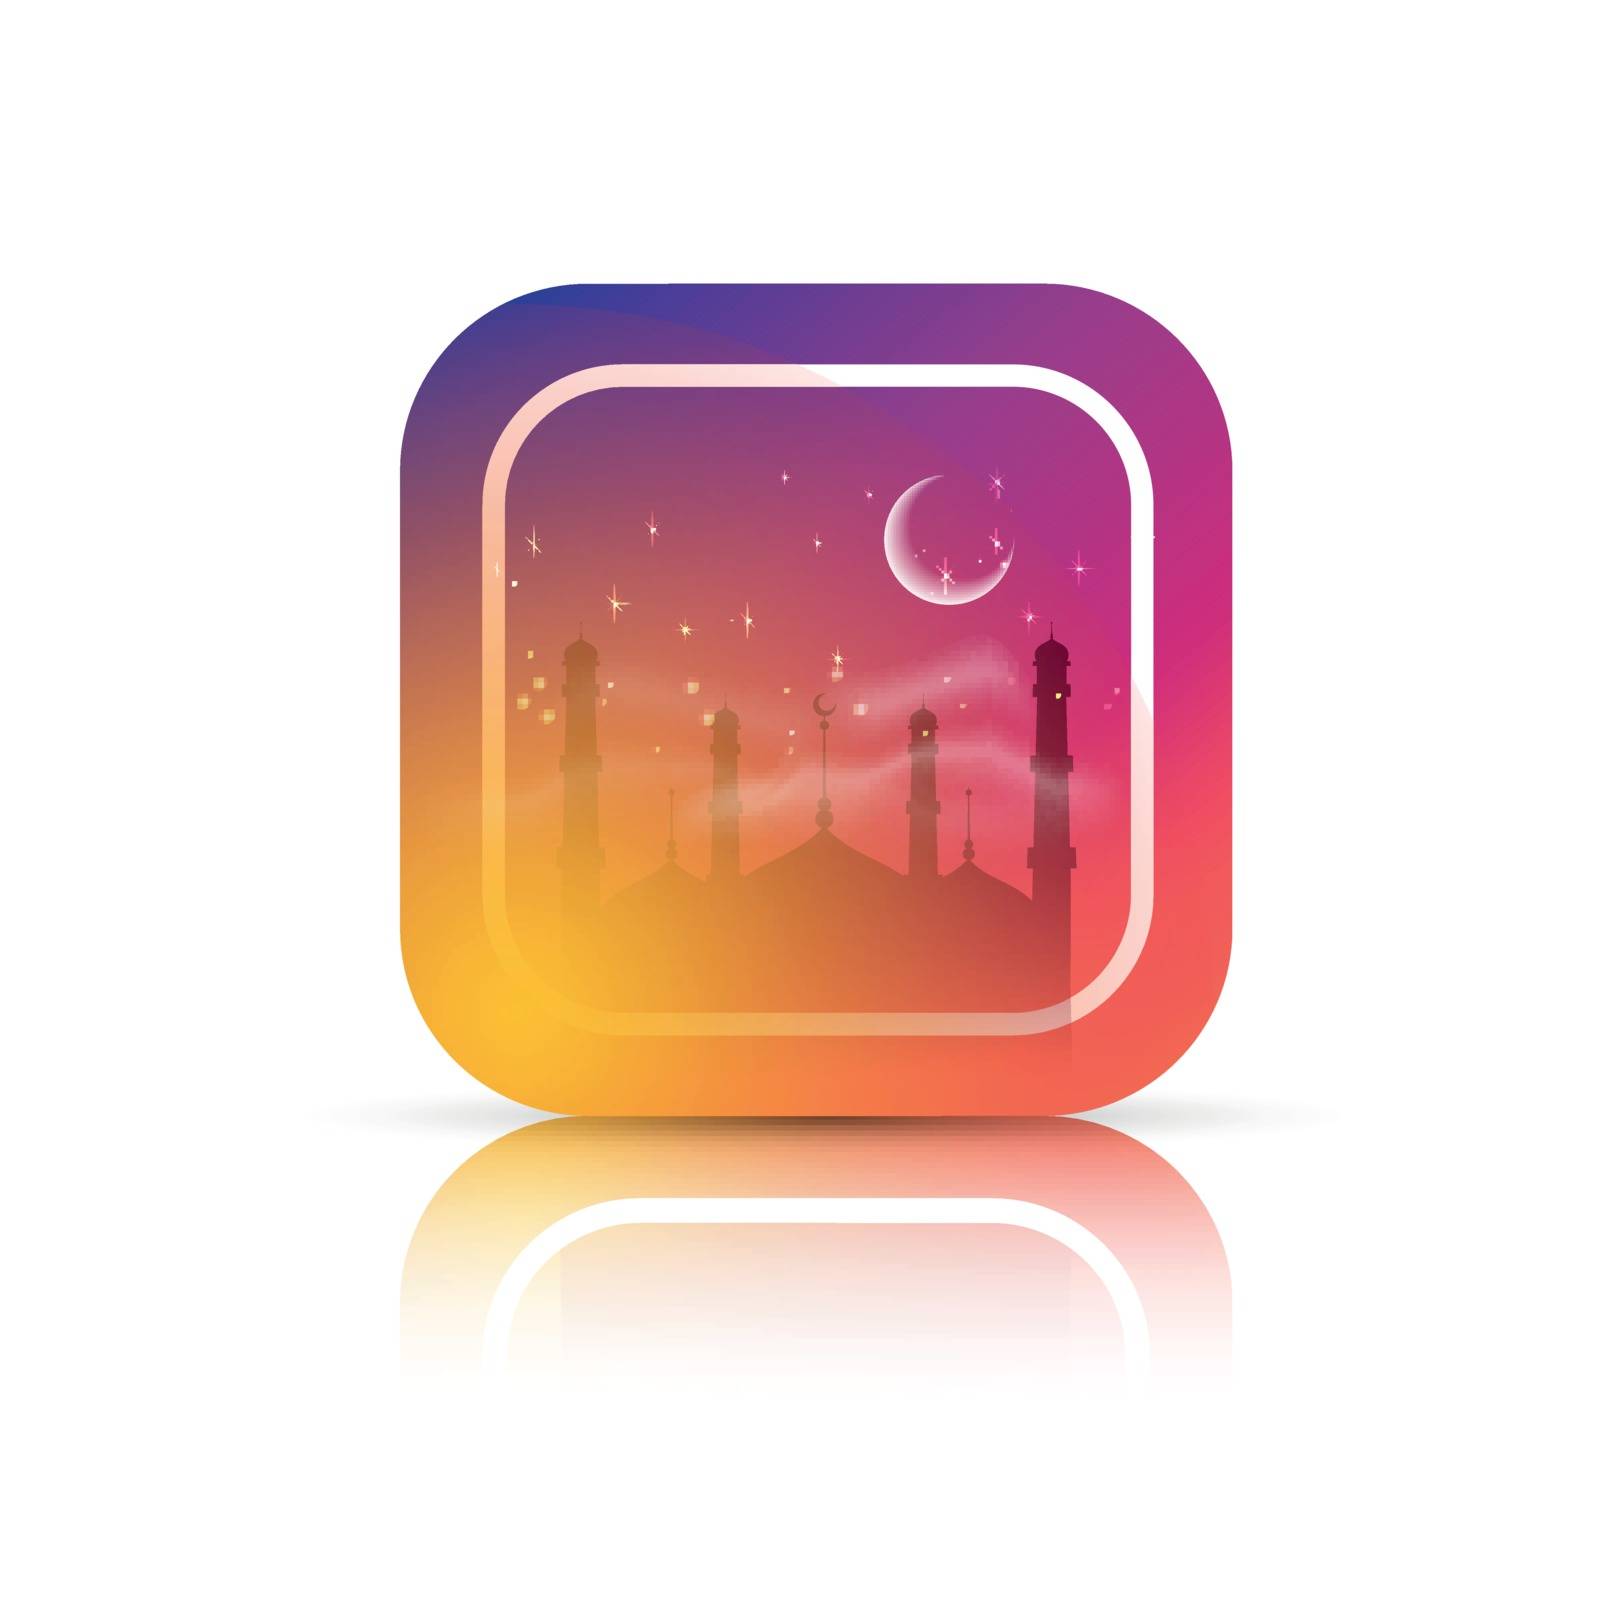 Silhouette of Mosque in starry moonlight night, Can be used as sticker, tag or label design for Muslim Community Festivals celebration.